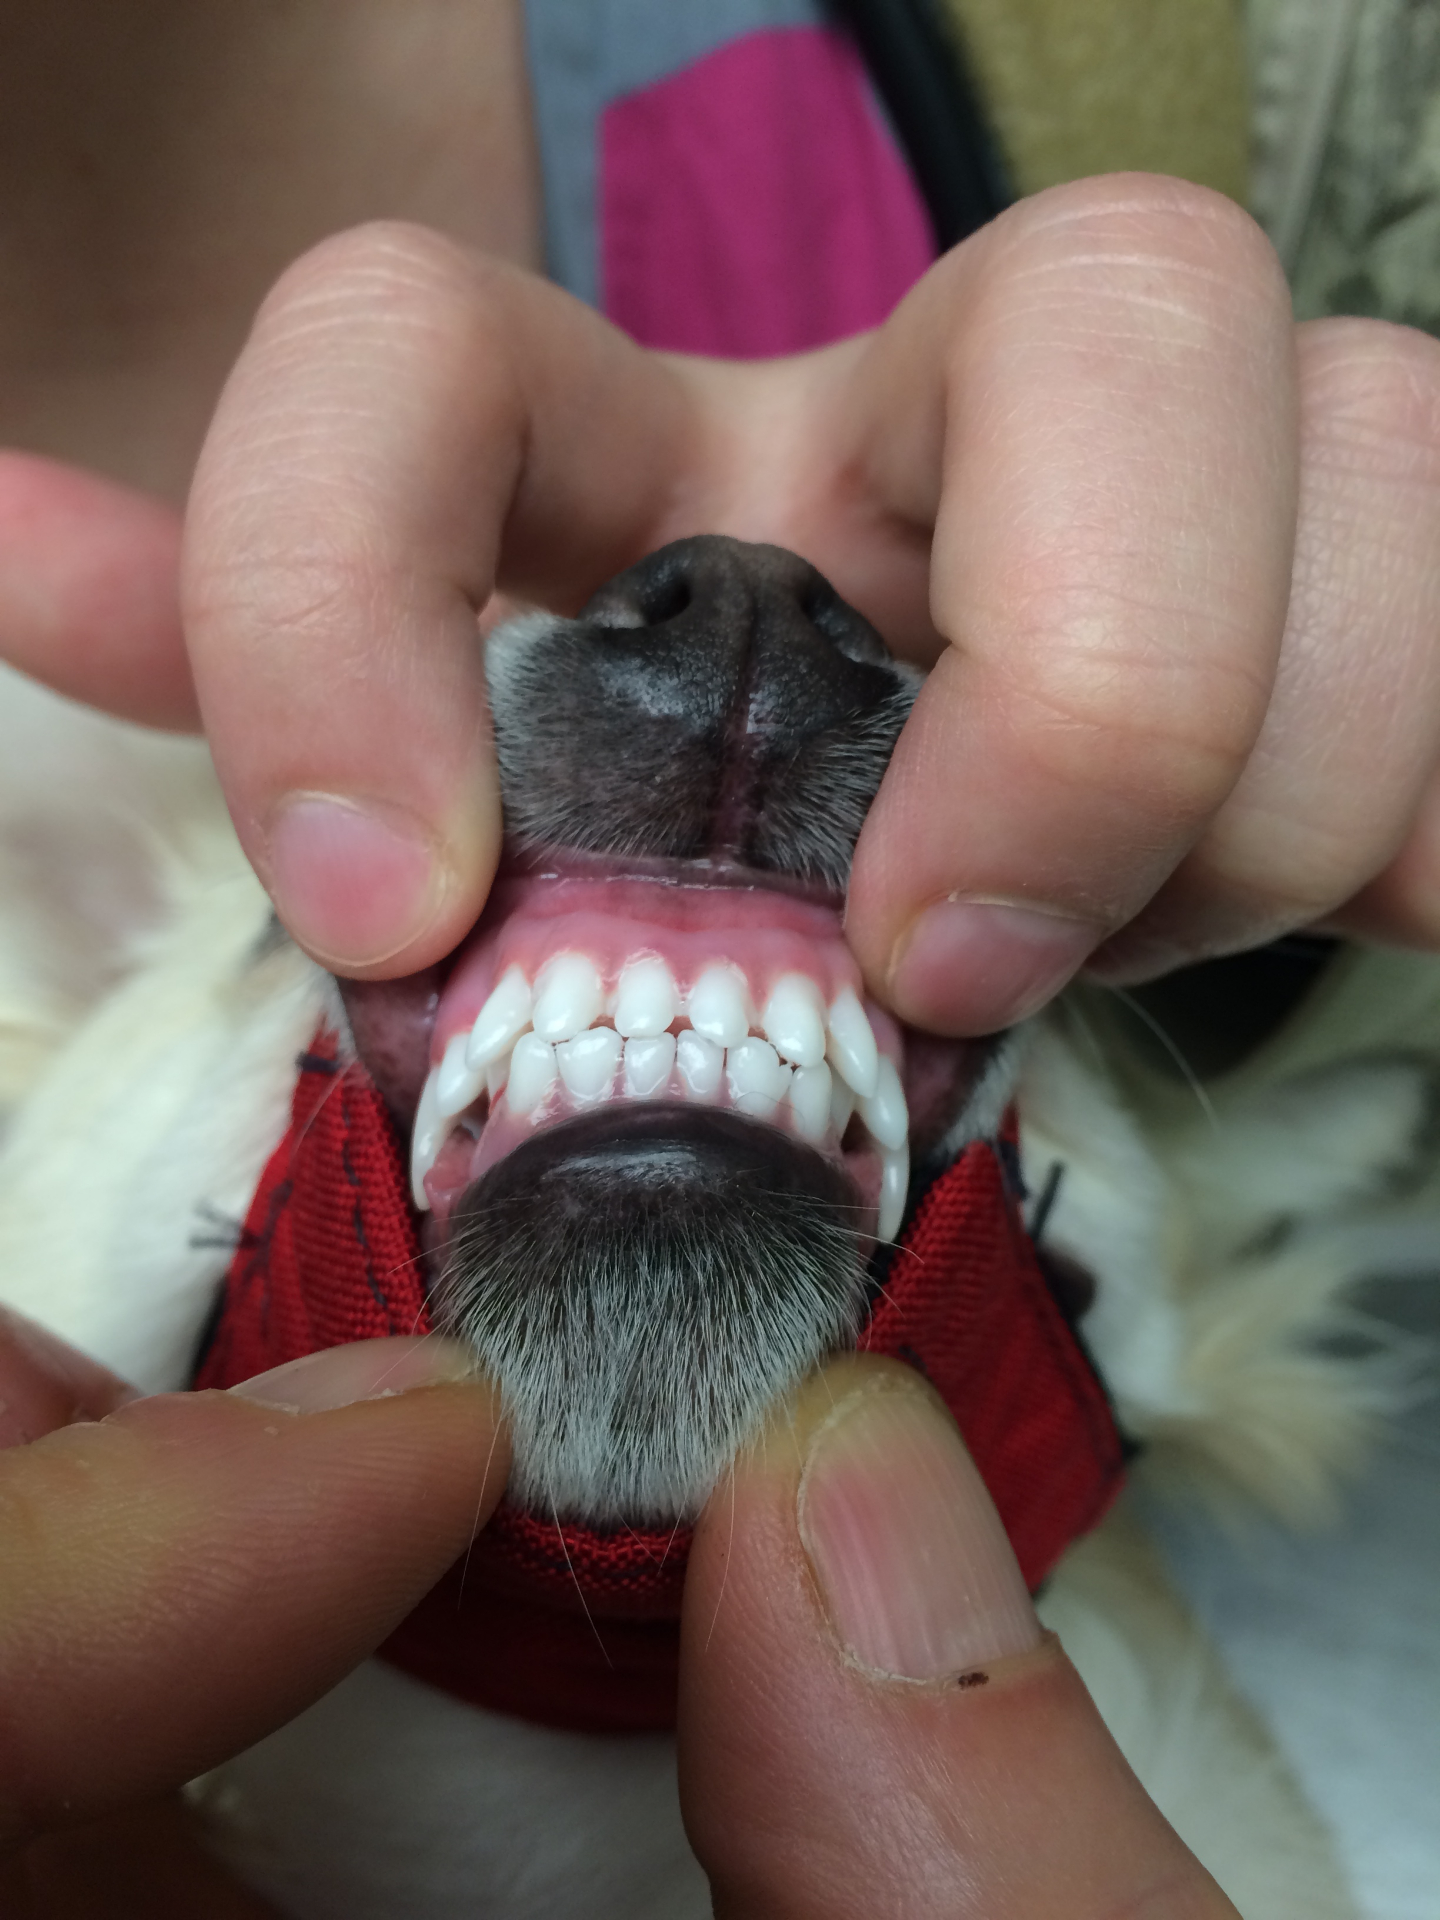 Retained baby teeth lead to narrow canine teeth. Note upper incisors pushed out as well.